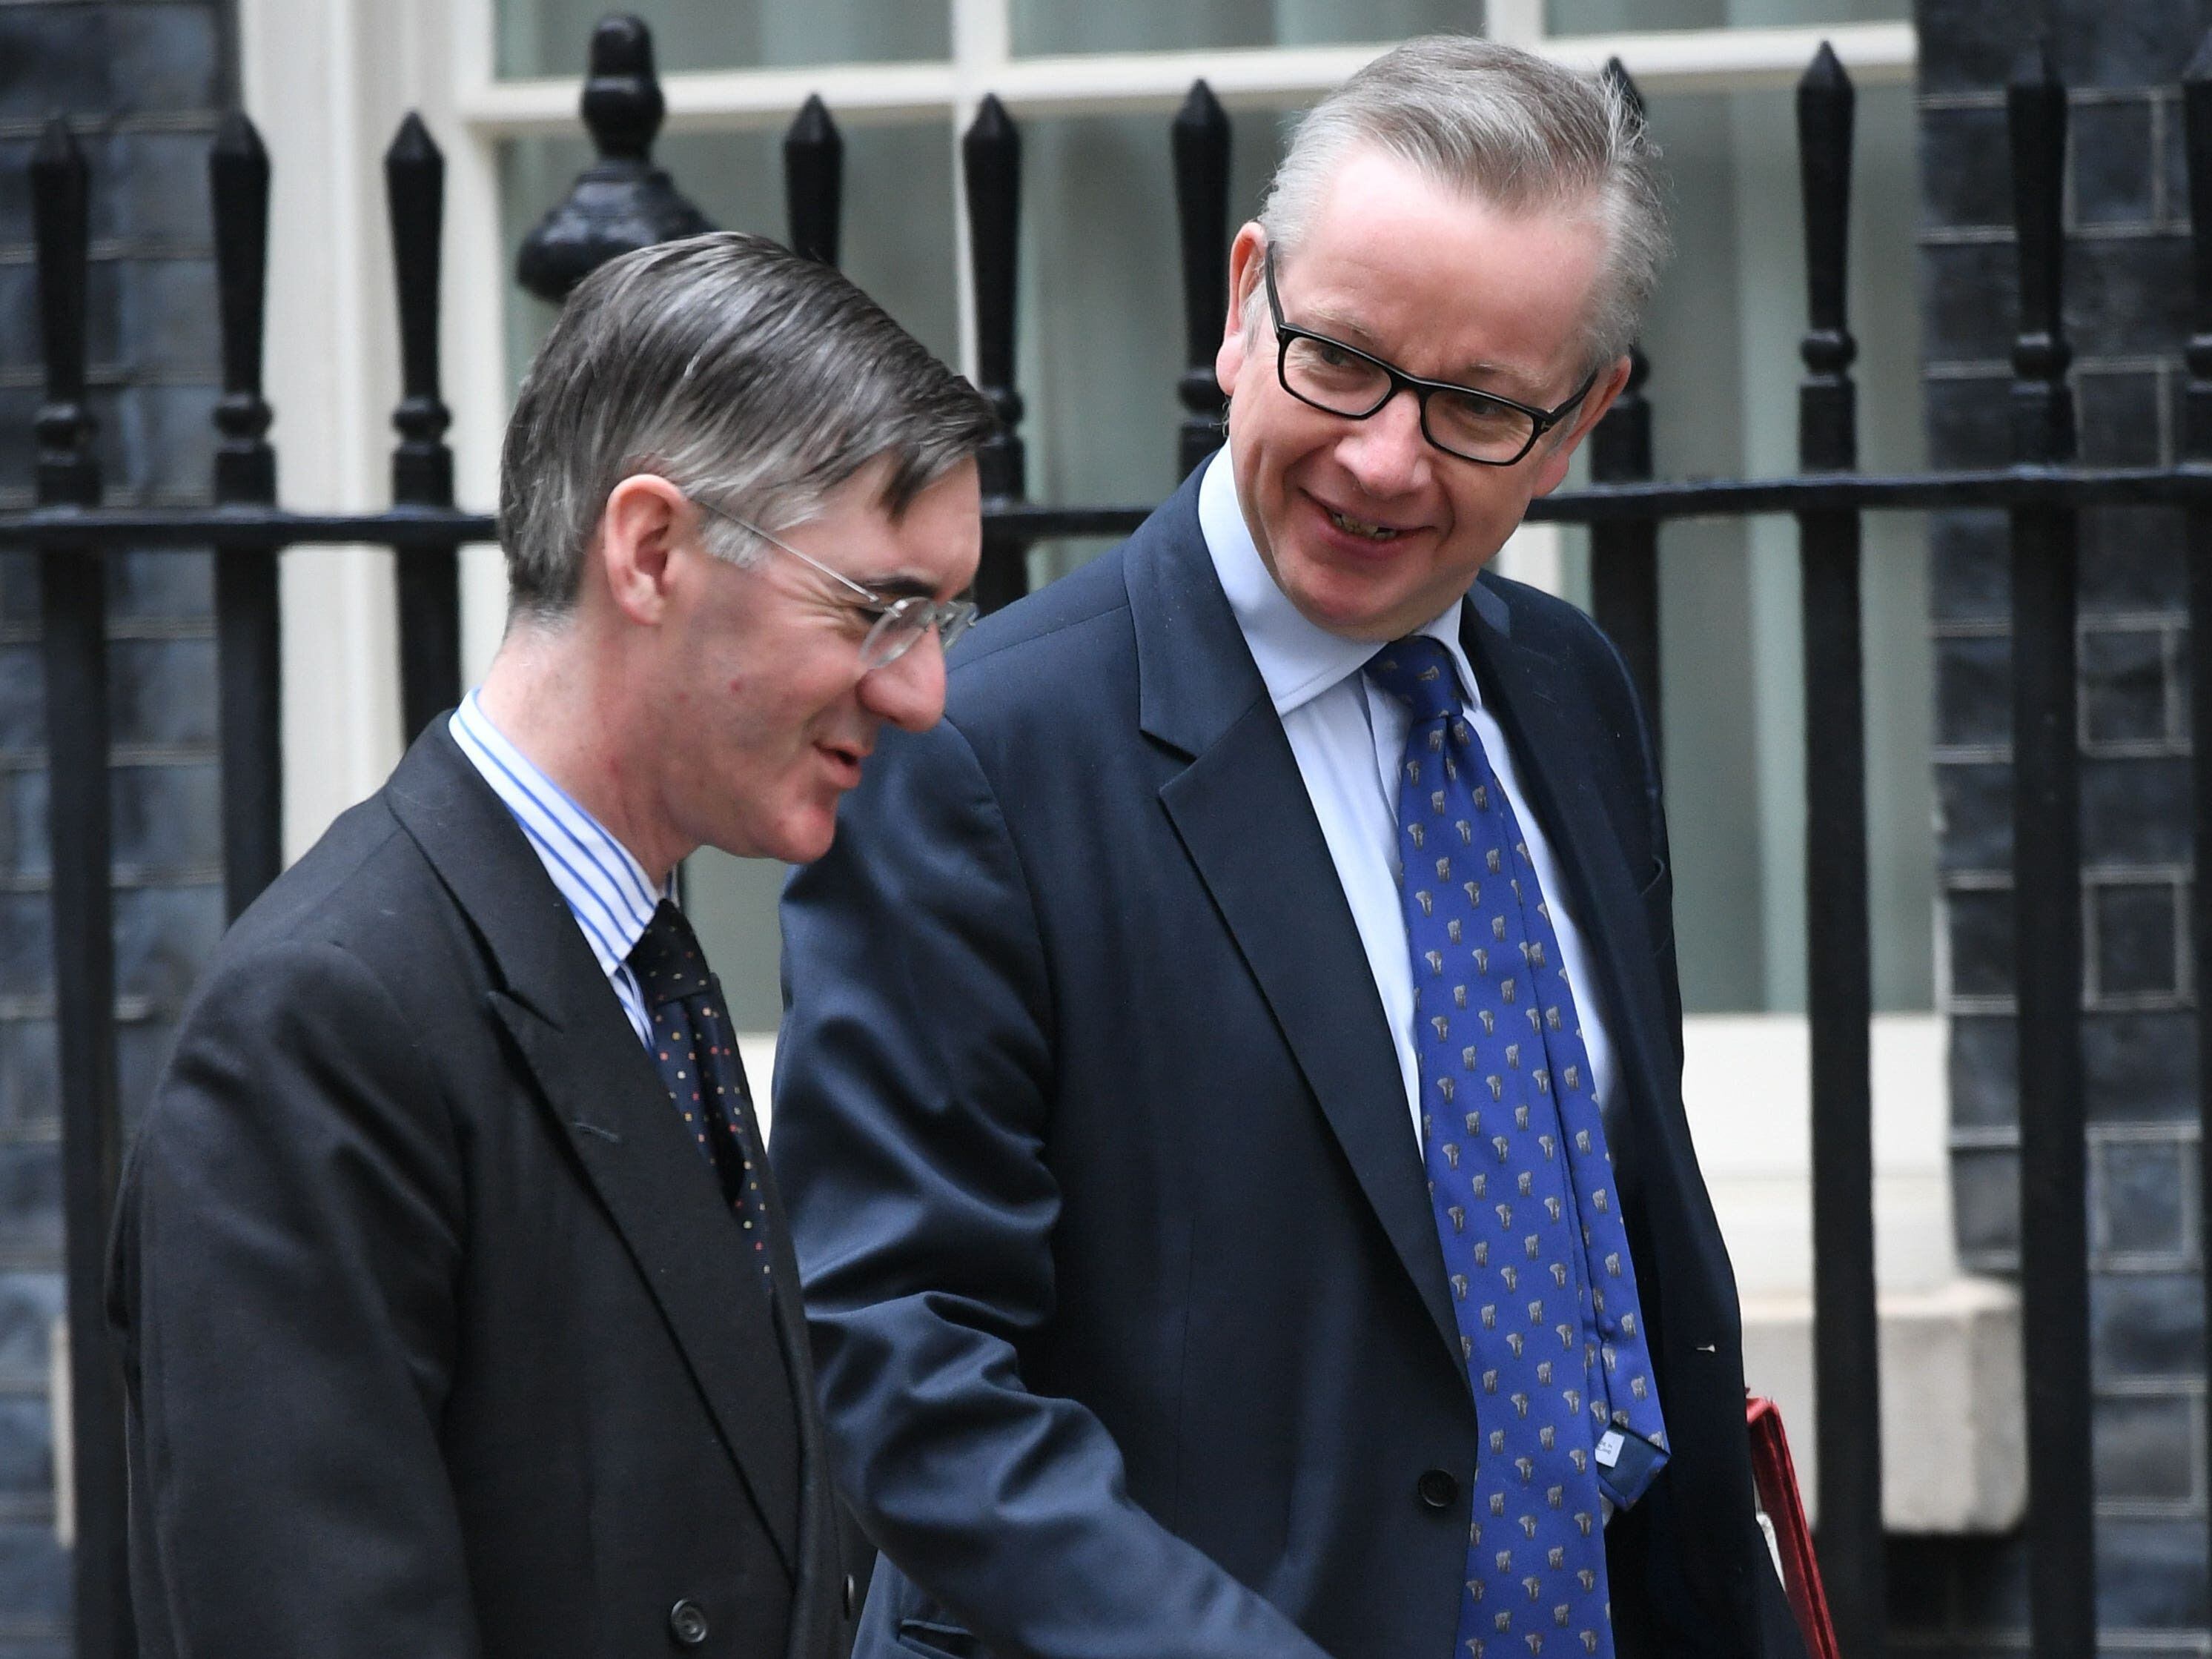 Michael Gove and Jacob Rees-Mogg trade polite blows across conference floor